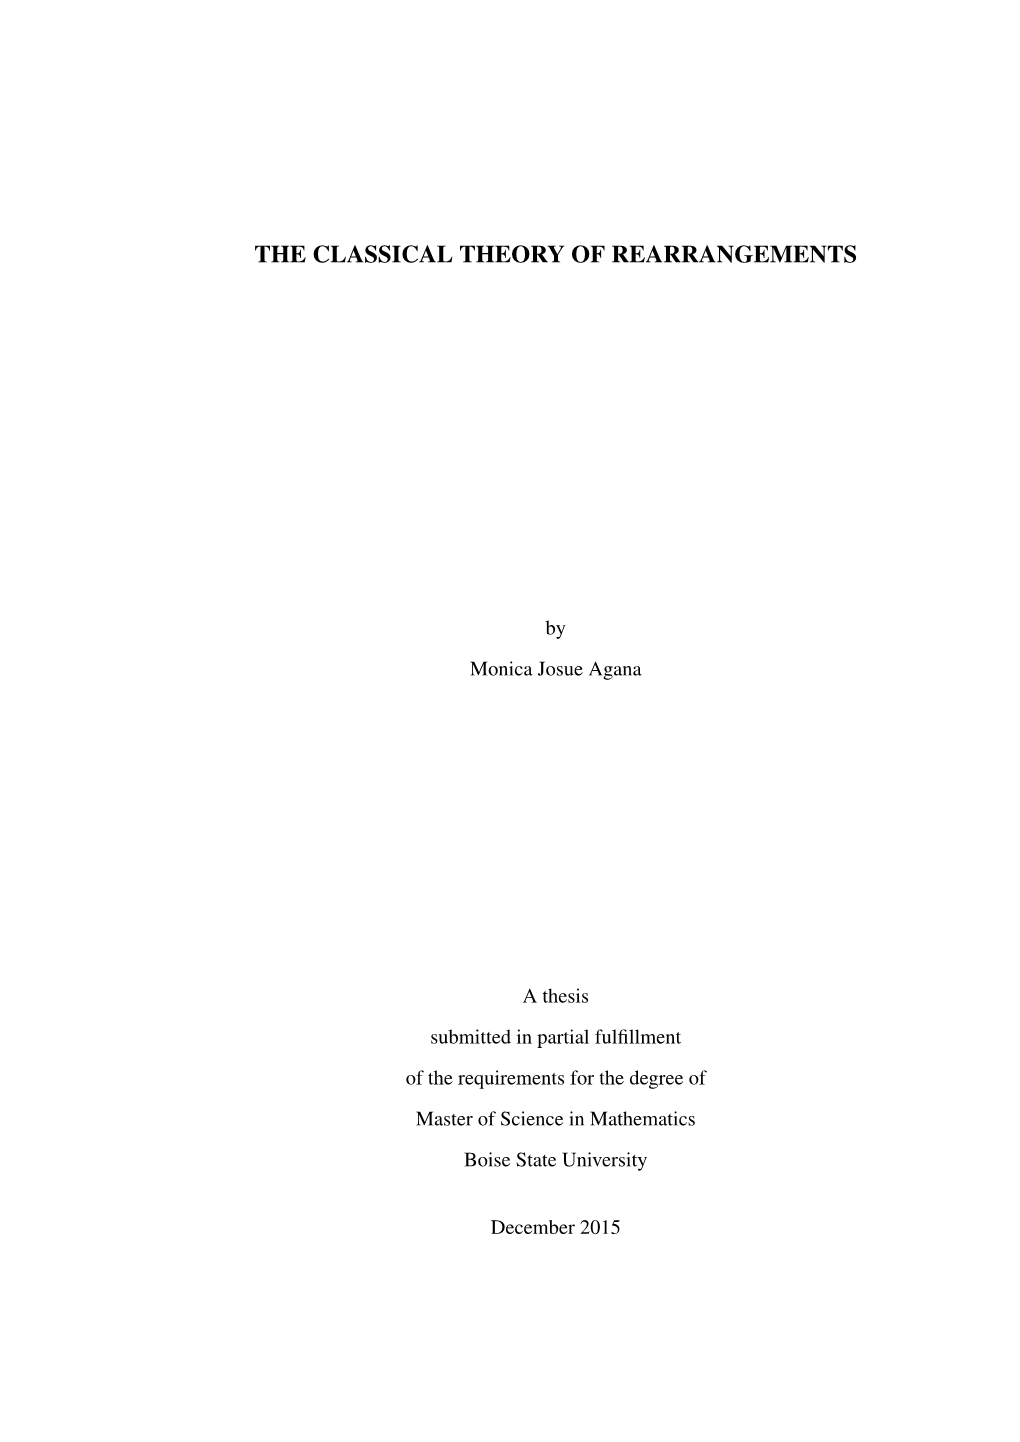 The Classical Theory of Rearrangements